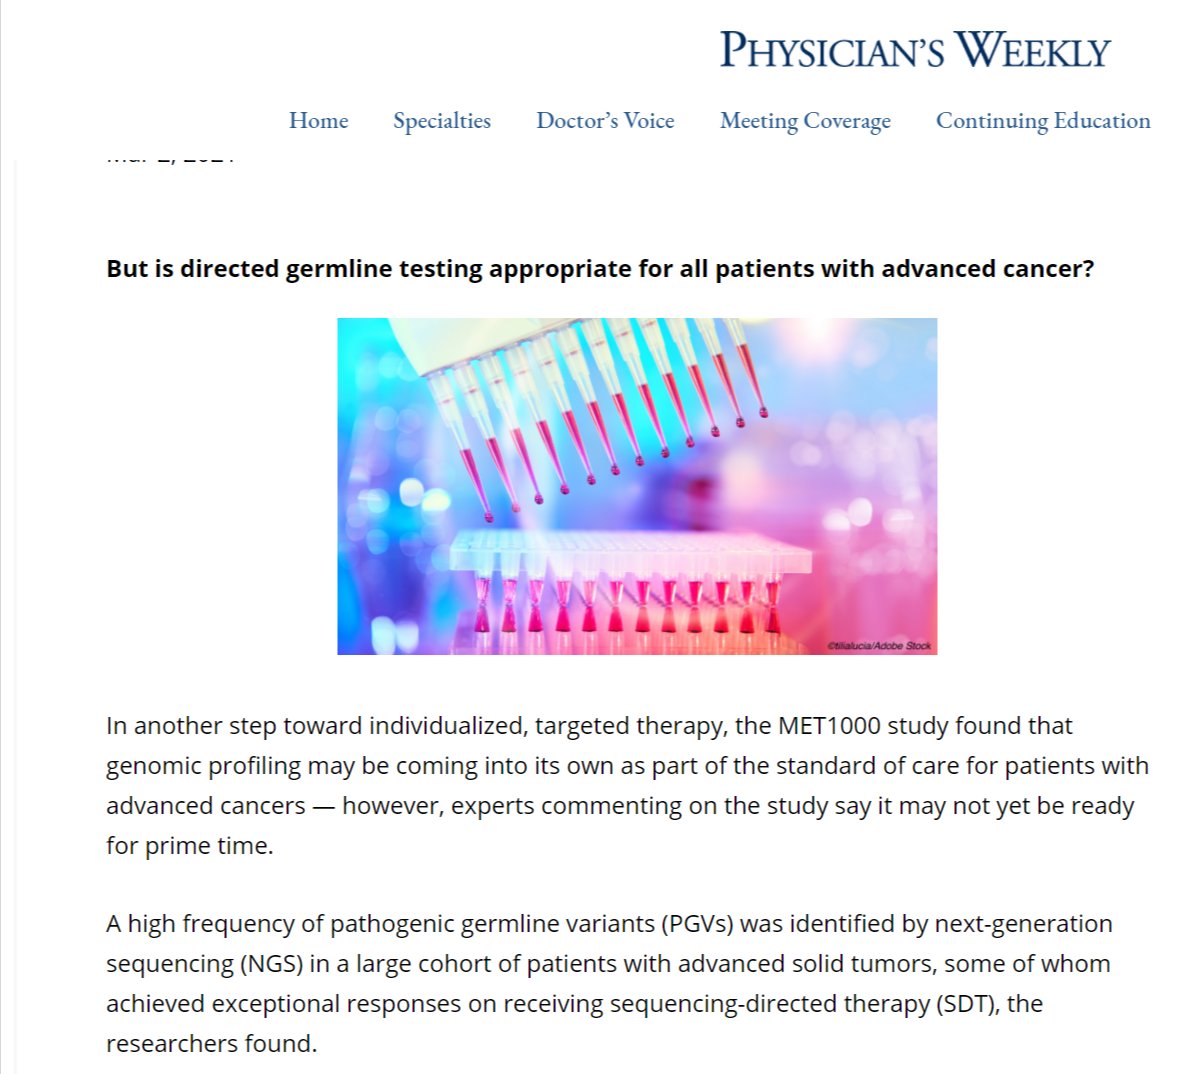 .@physicianswkly highlights recent work by @ErinCobain & #ChinnaiyanLab from @JAMAOnc that examined how genomic profiling may be coming into its own as part of the standard of care for patients with advanced cancers.

physiciansweekly.com/met1000-gettin…